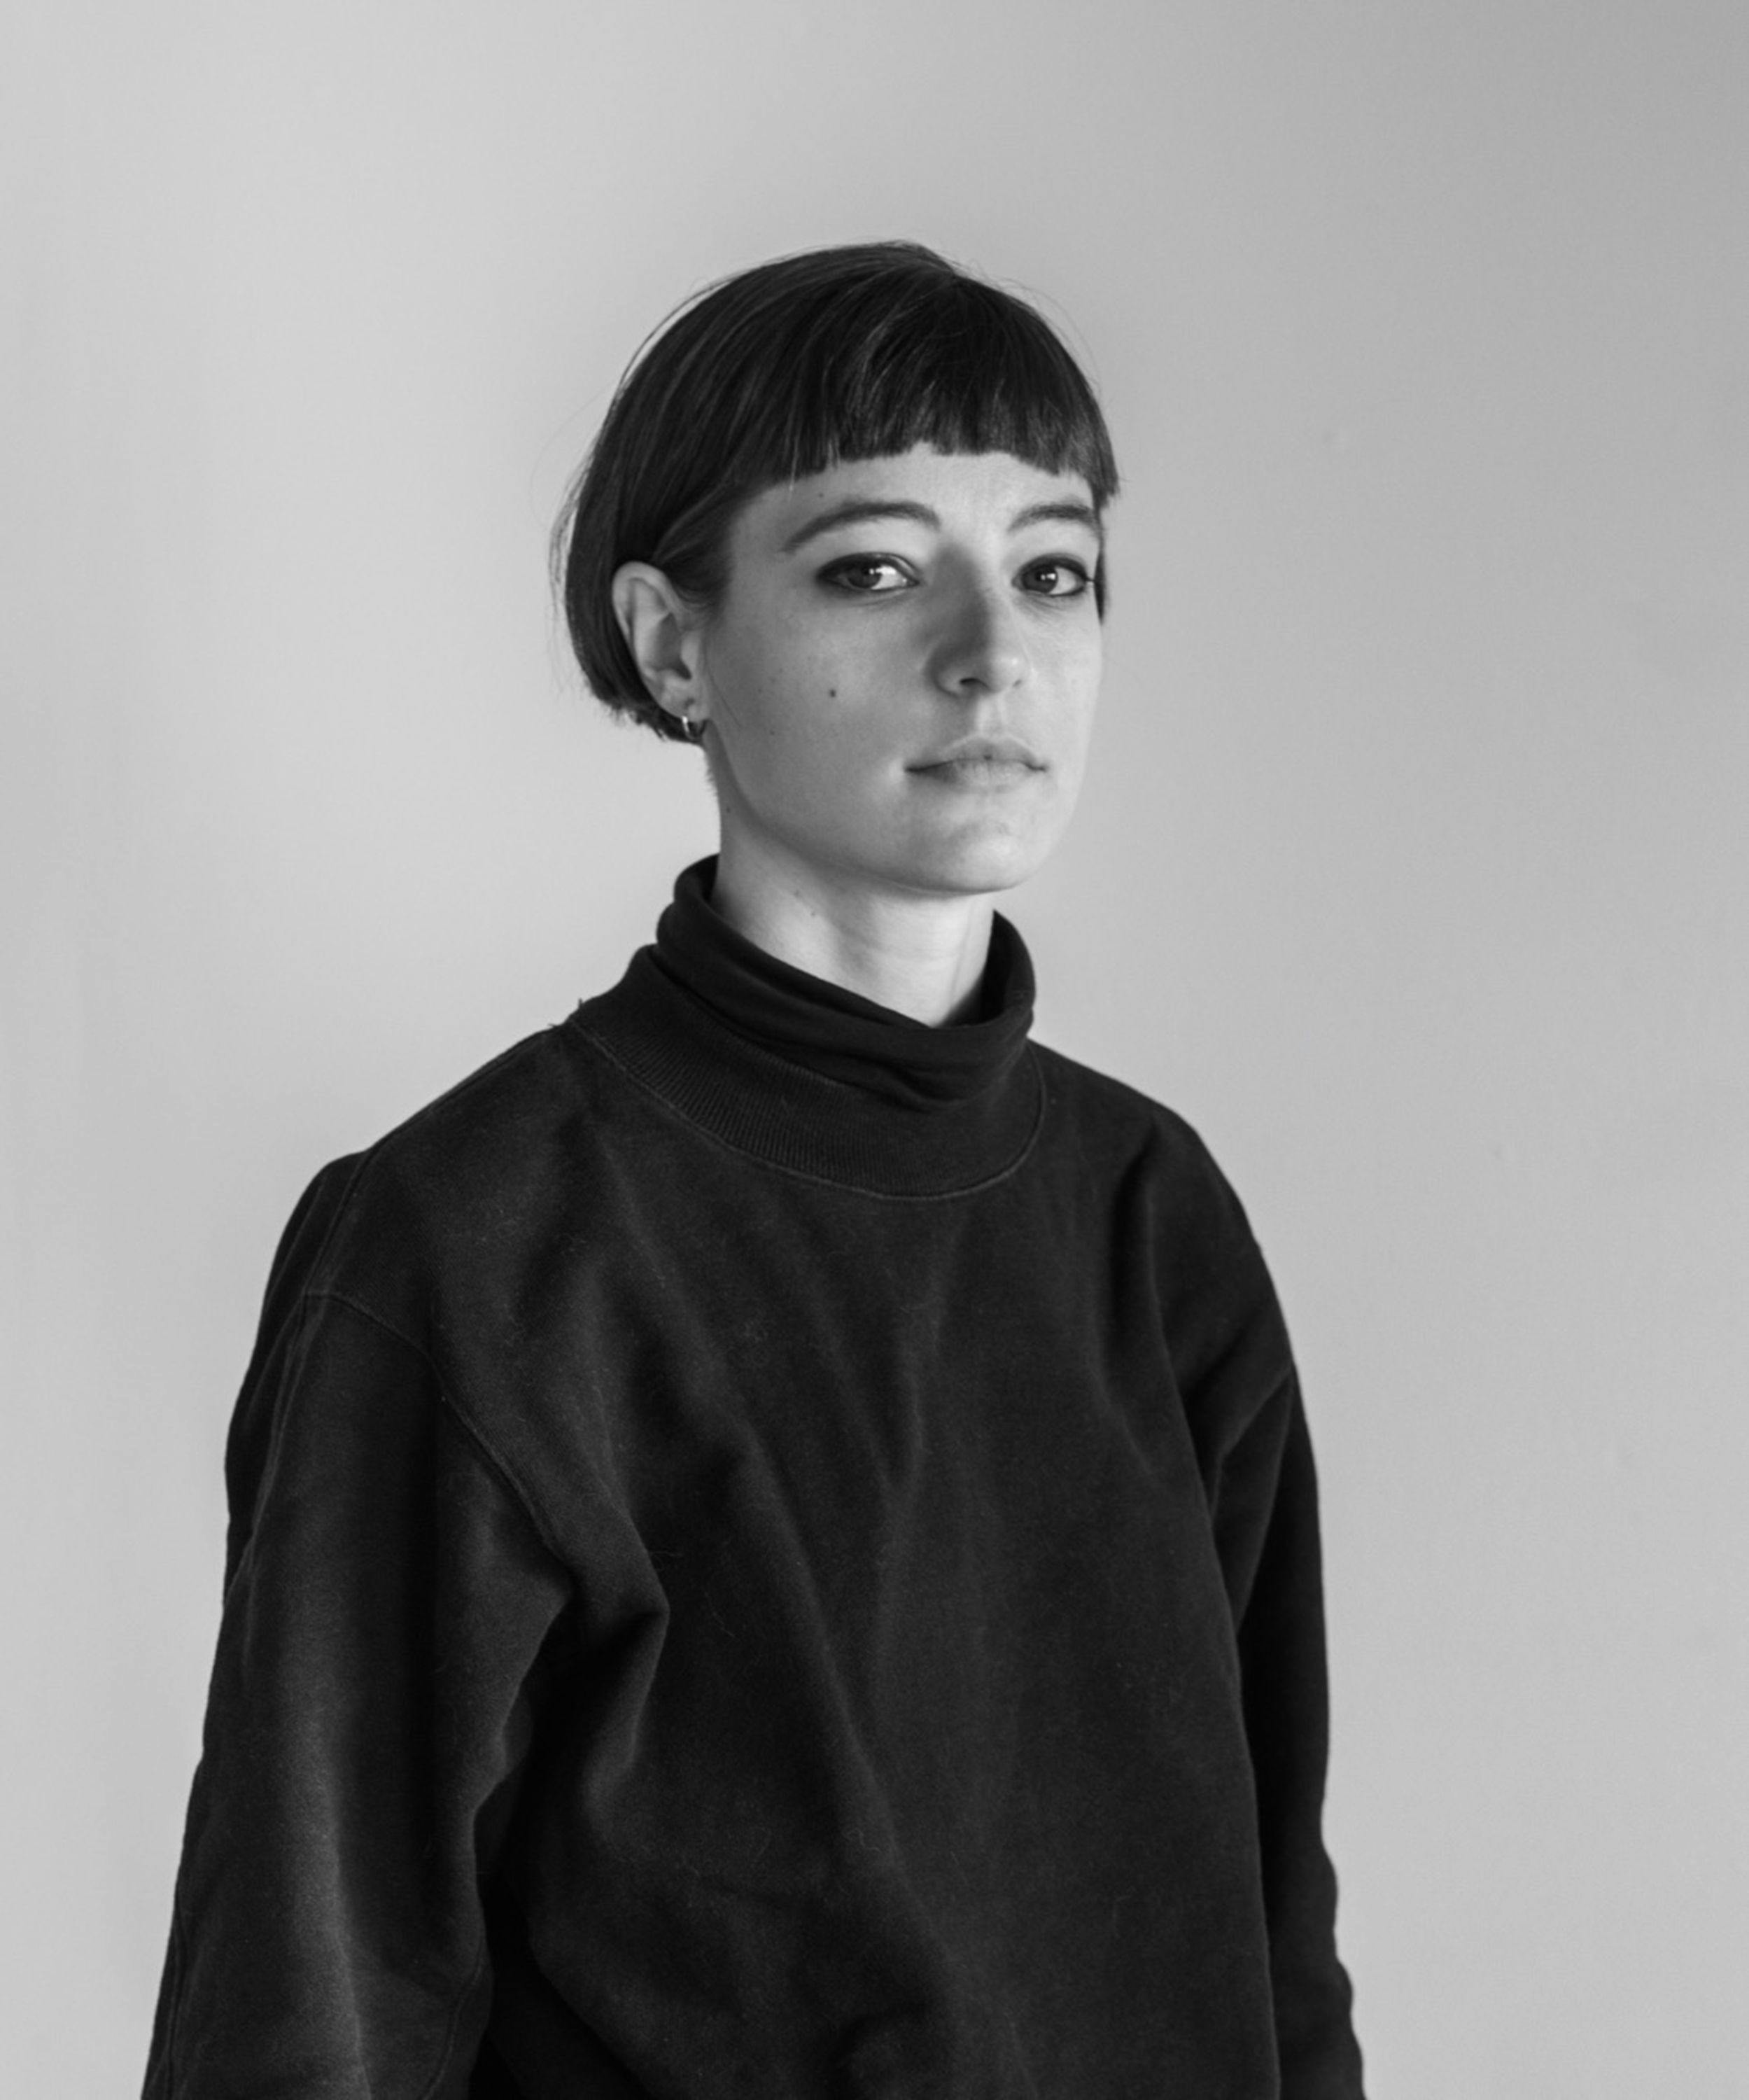 A black and white portrait of a white woman with a short bob haircut and bangs wearing a black turtleneck and small hoop earrings.